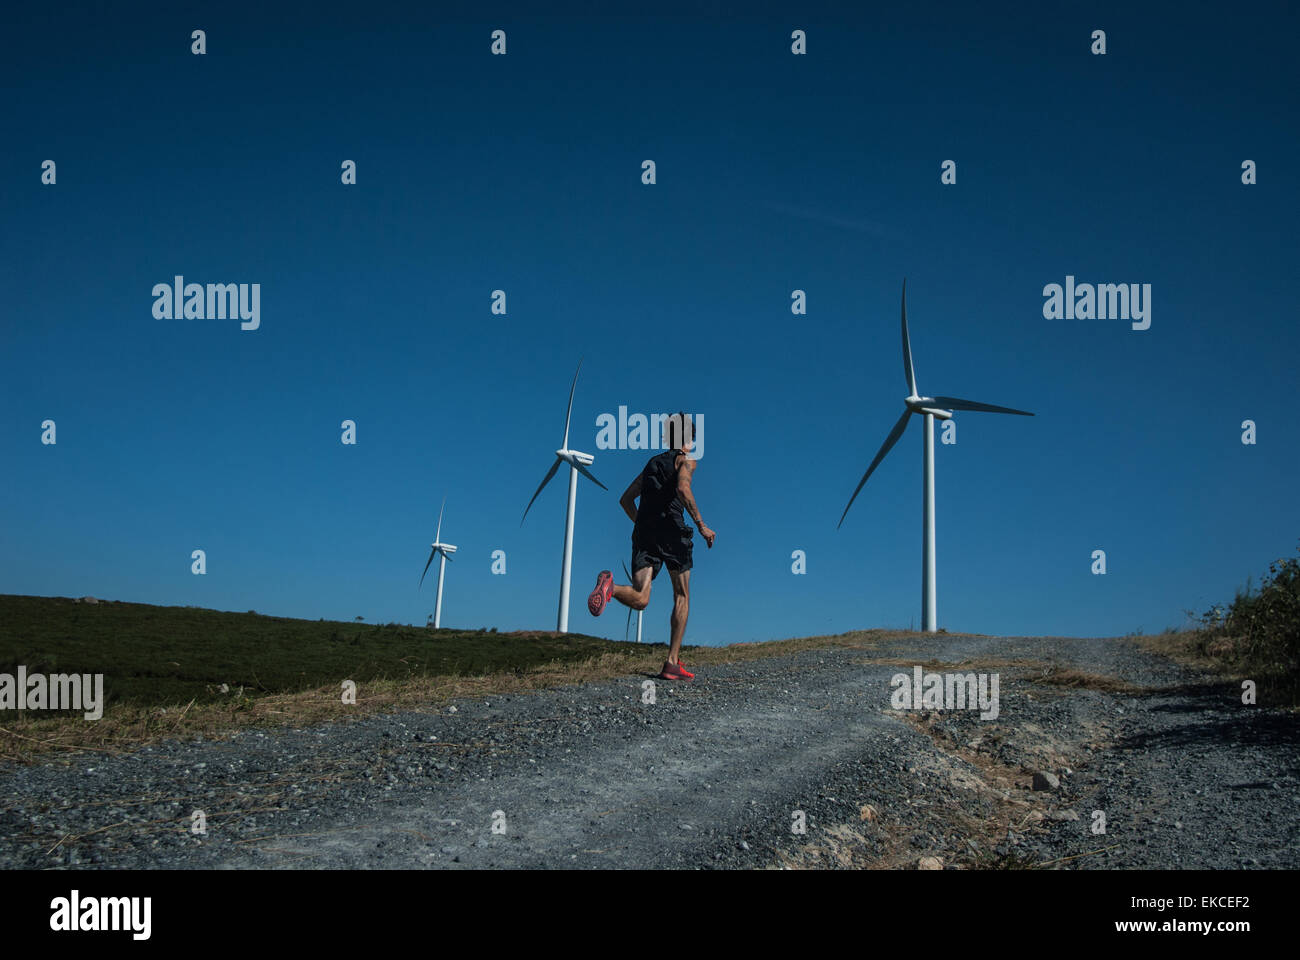 Mid adult man jogging on road, wind turbines in distance Stock Photo